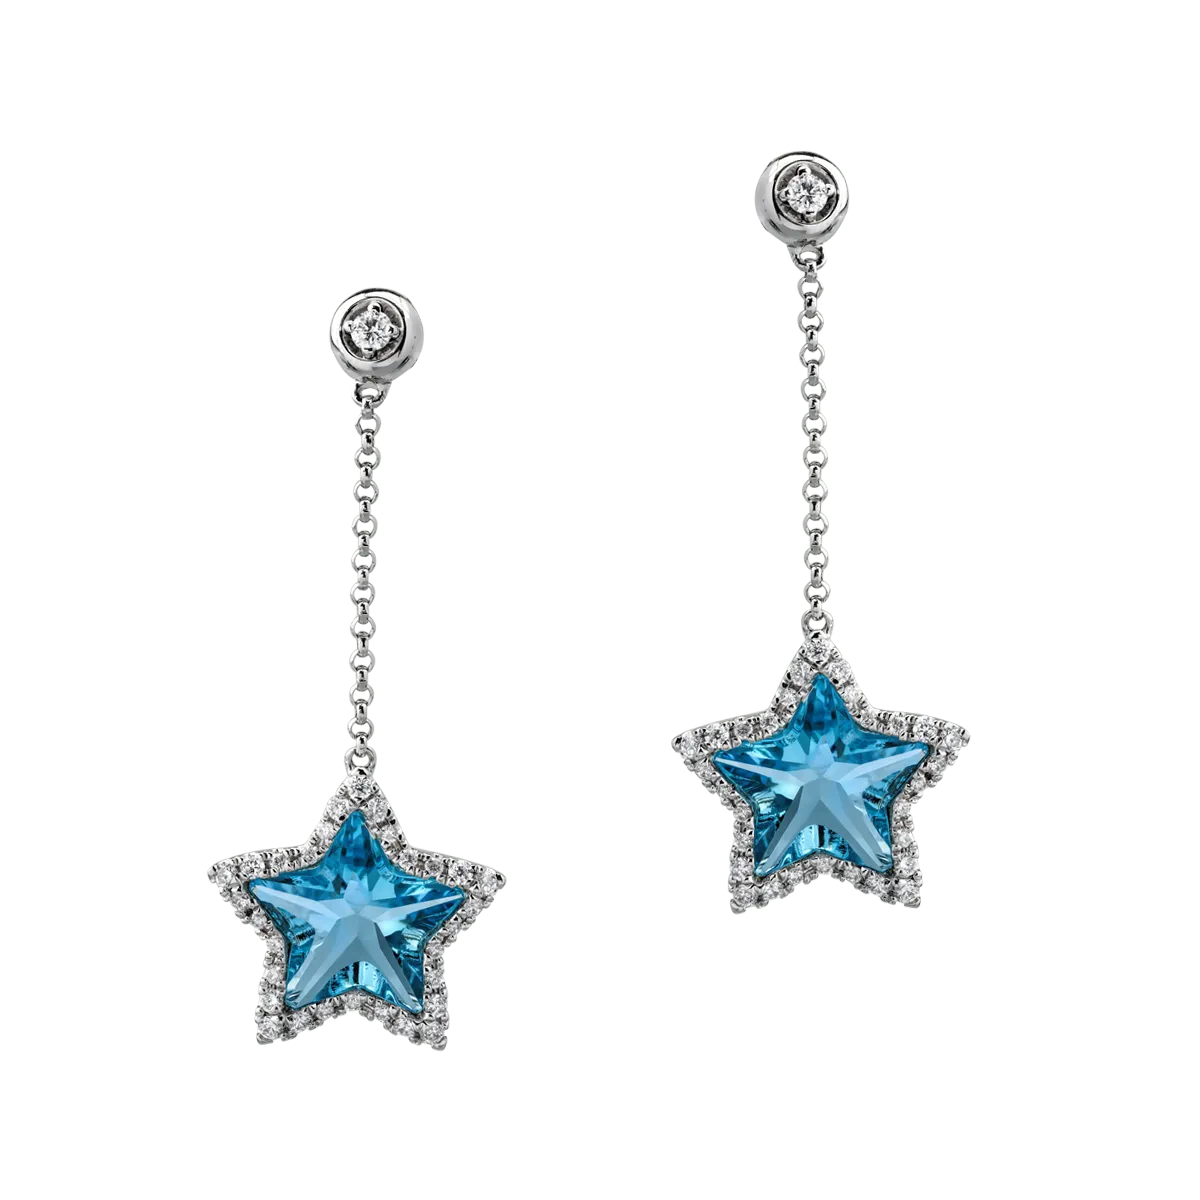 18K white gold earrings with 2.7ct blue topaz and 0.3ct diamonds